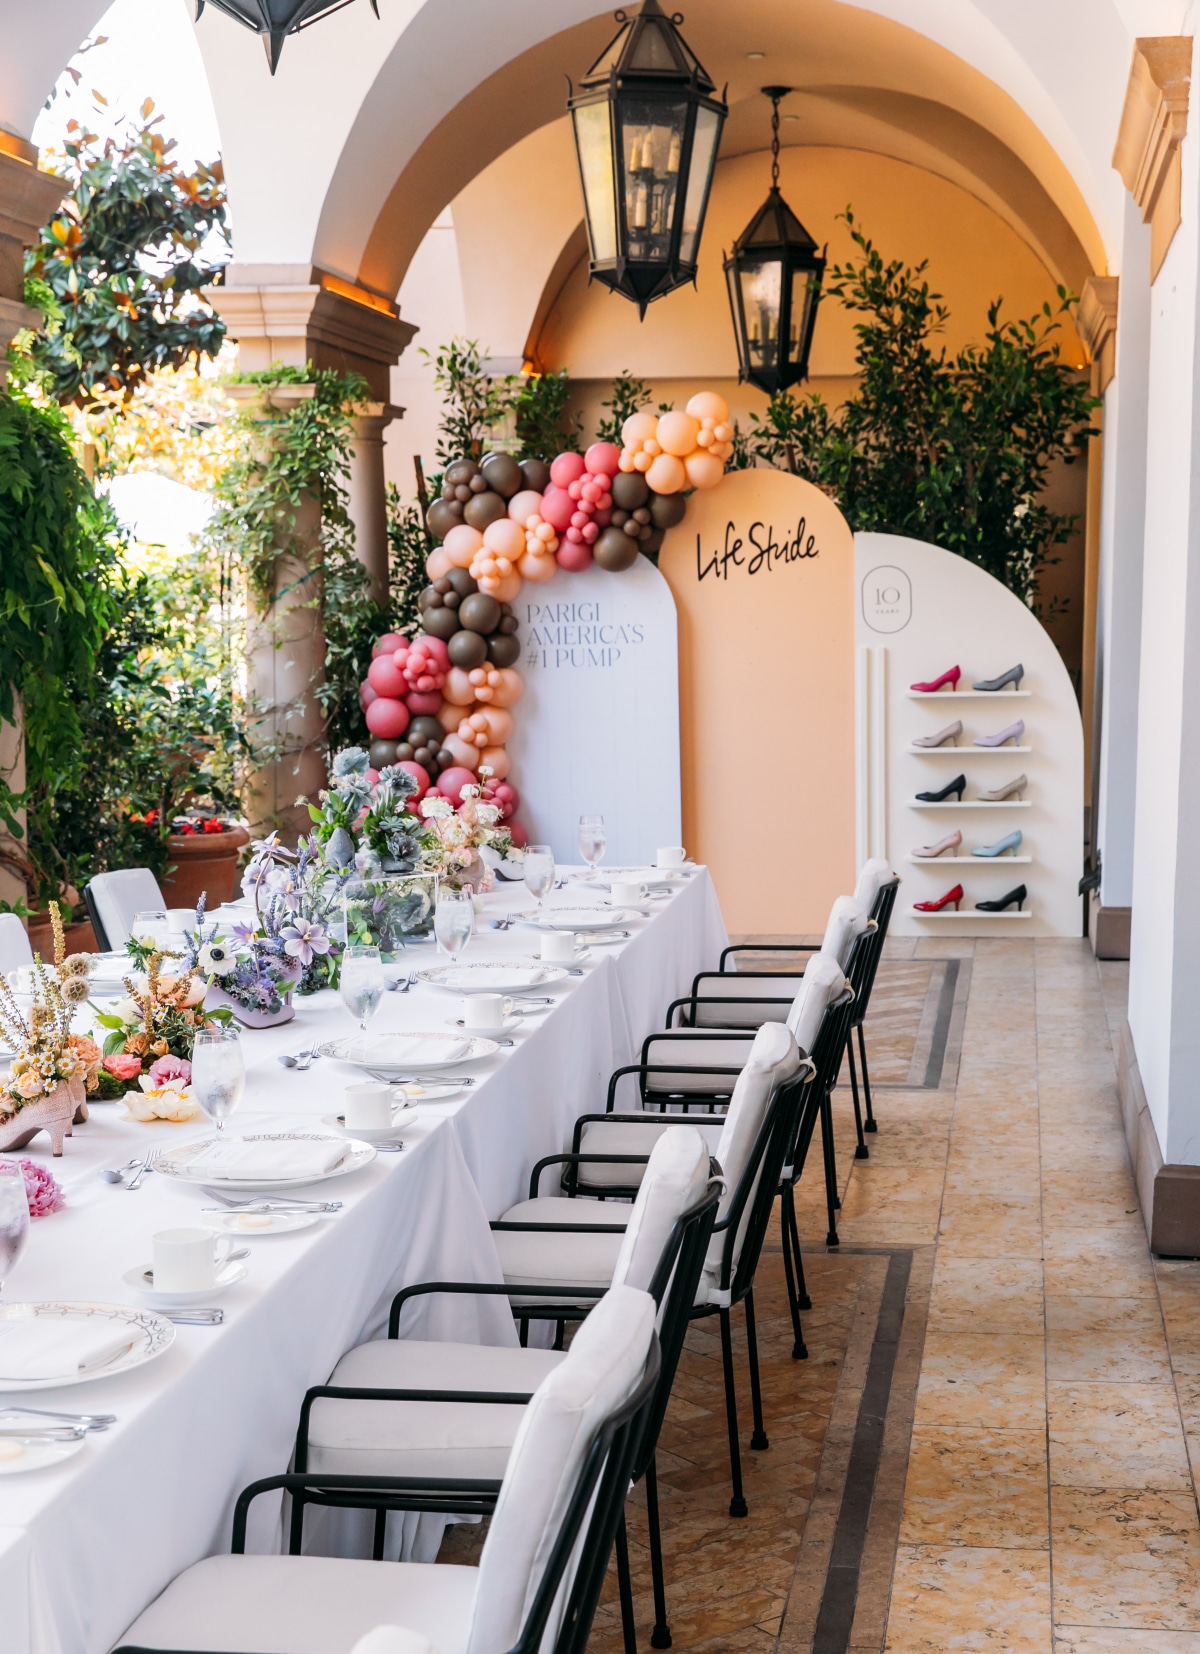 An Instagram-worthy balloon backdrop and gorgeous florals adorned the tables of the Parigi brunch.